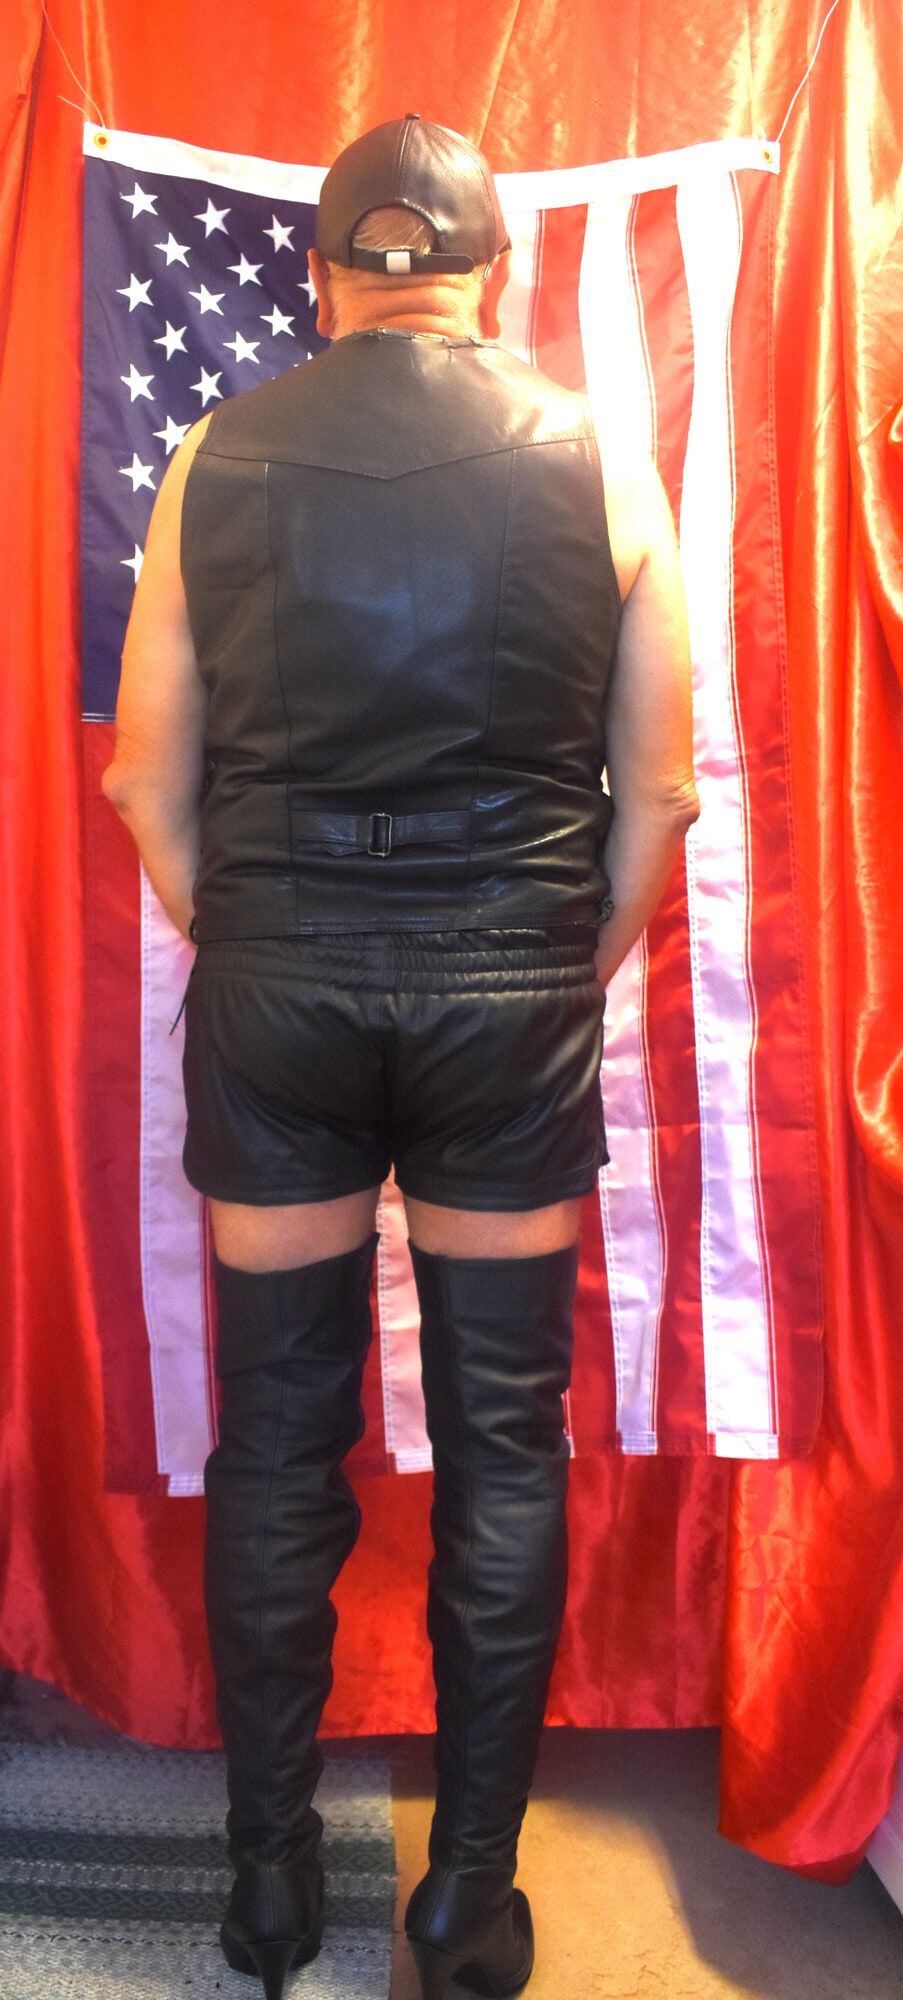 DRESSED IN BLACK TIGHT LEATHER. #26